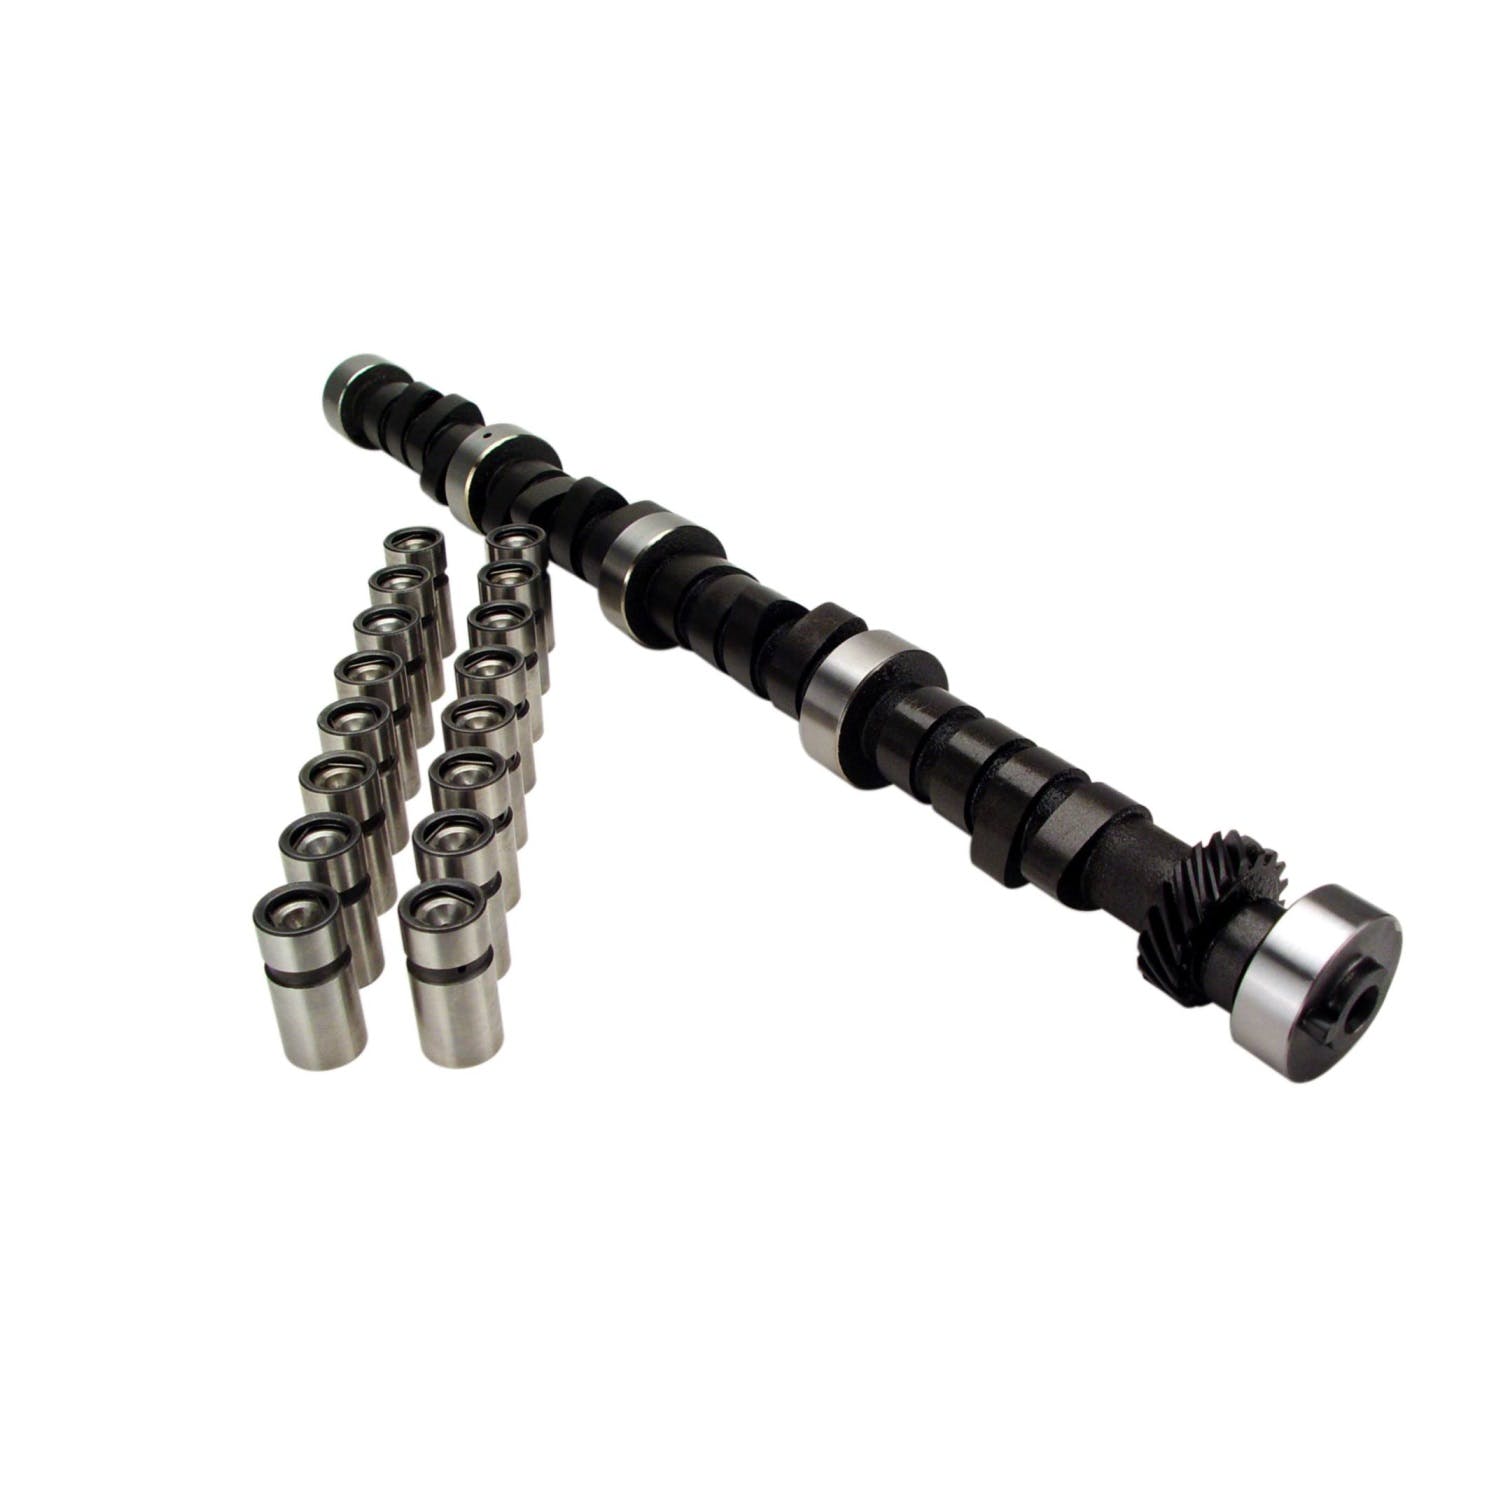 Competition Cams CL21-602-5 Big Mutha Thumpr Camshaft/Lifter Kit